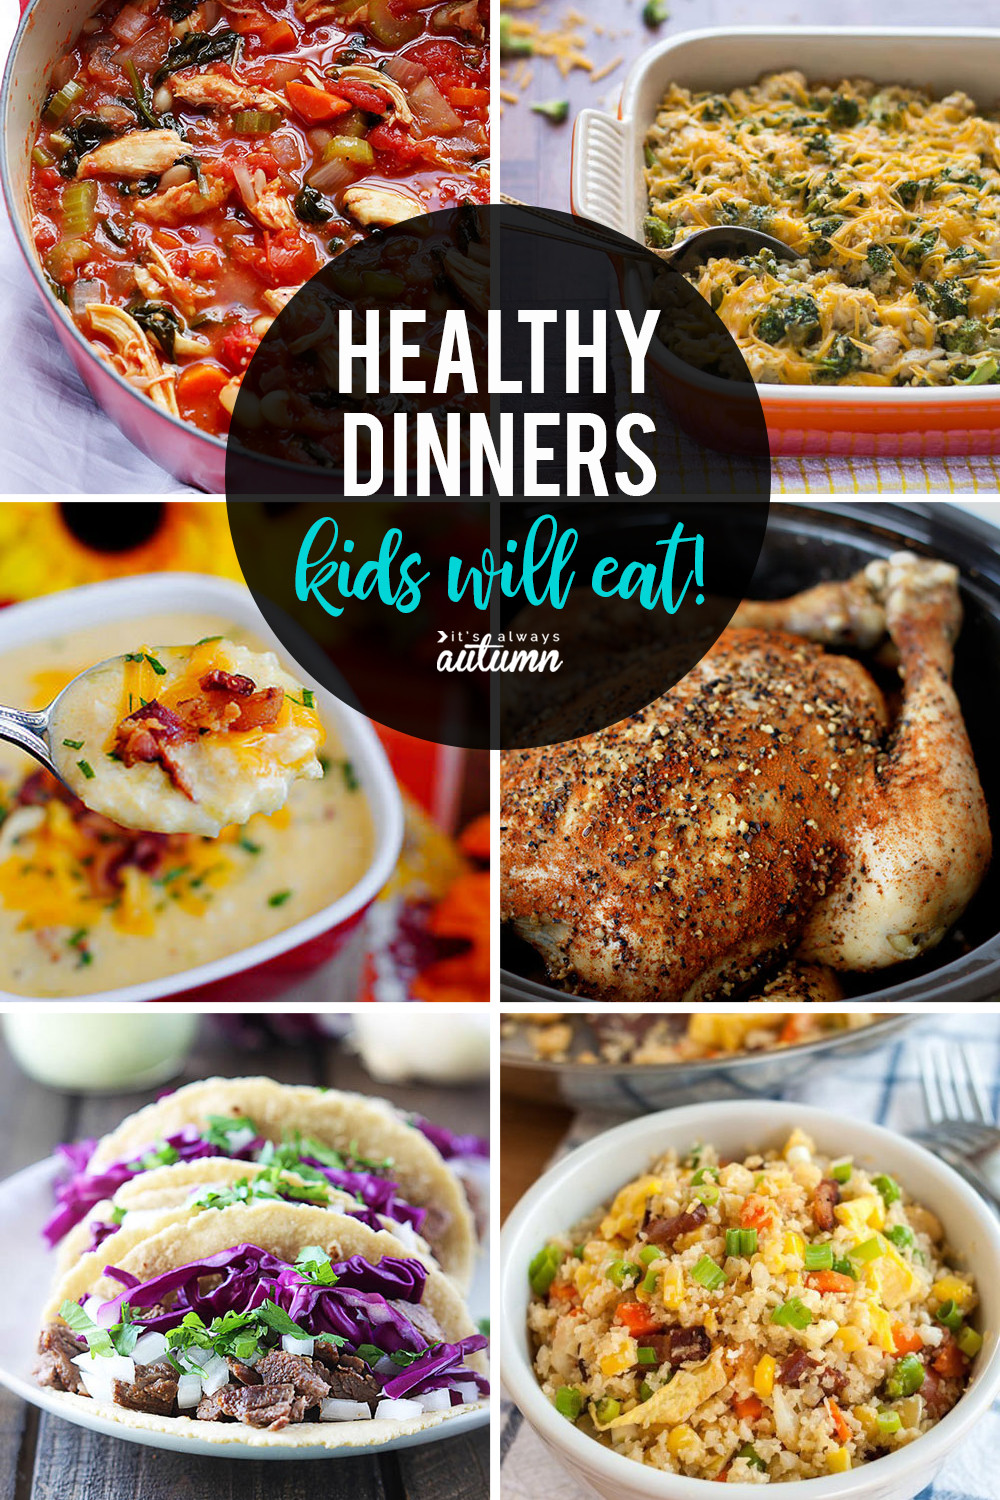 Healthy Dinner Recipes
 20 healthy easy recipes your kids will actually want to